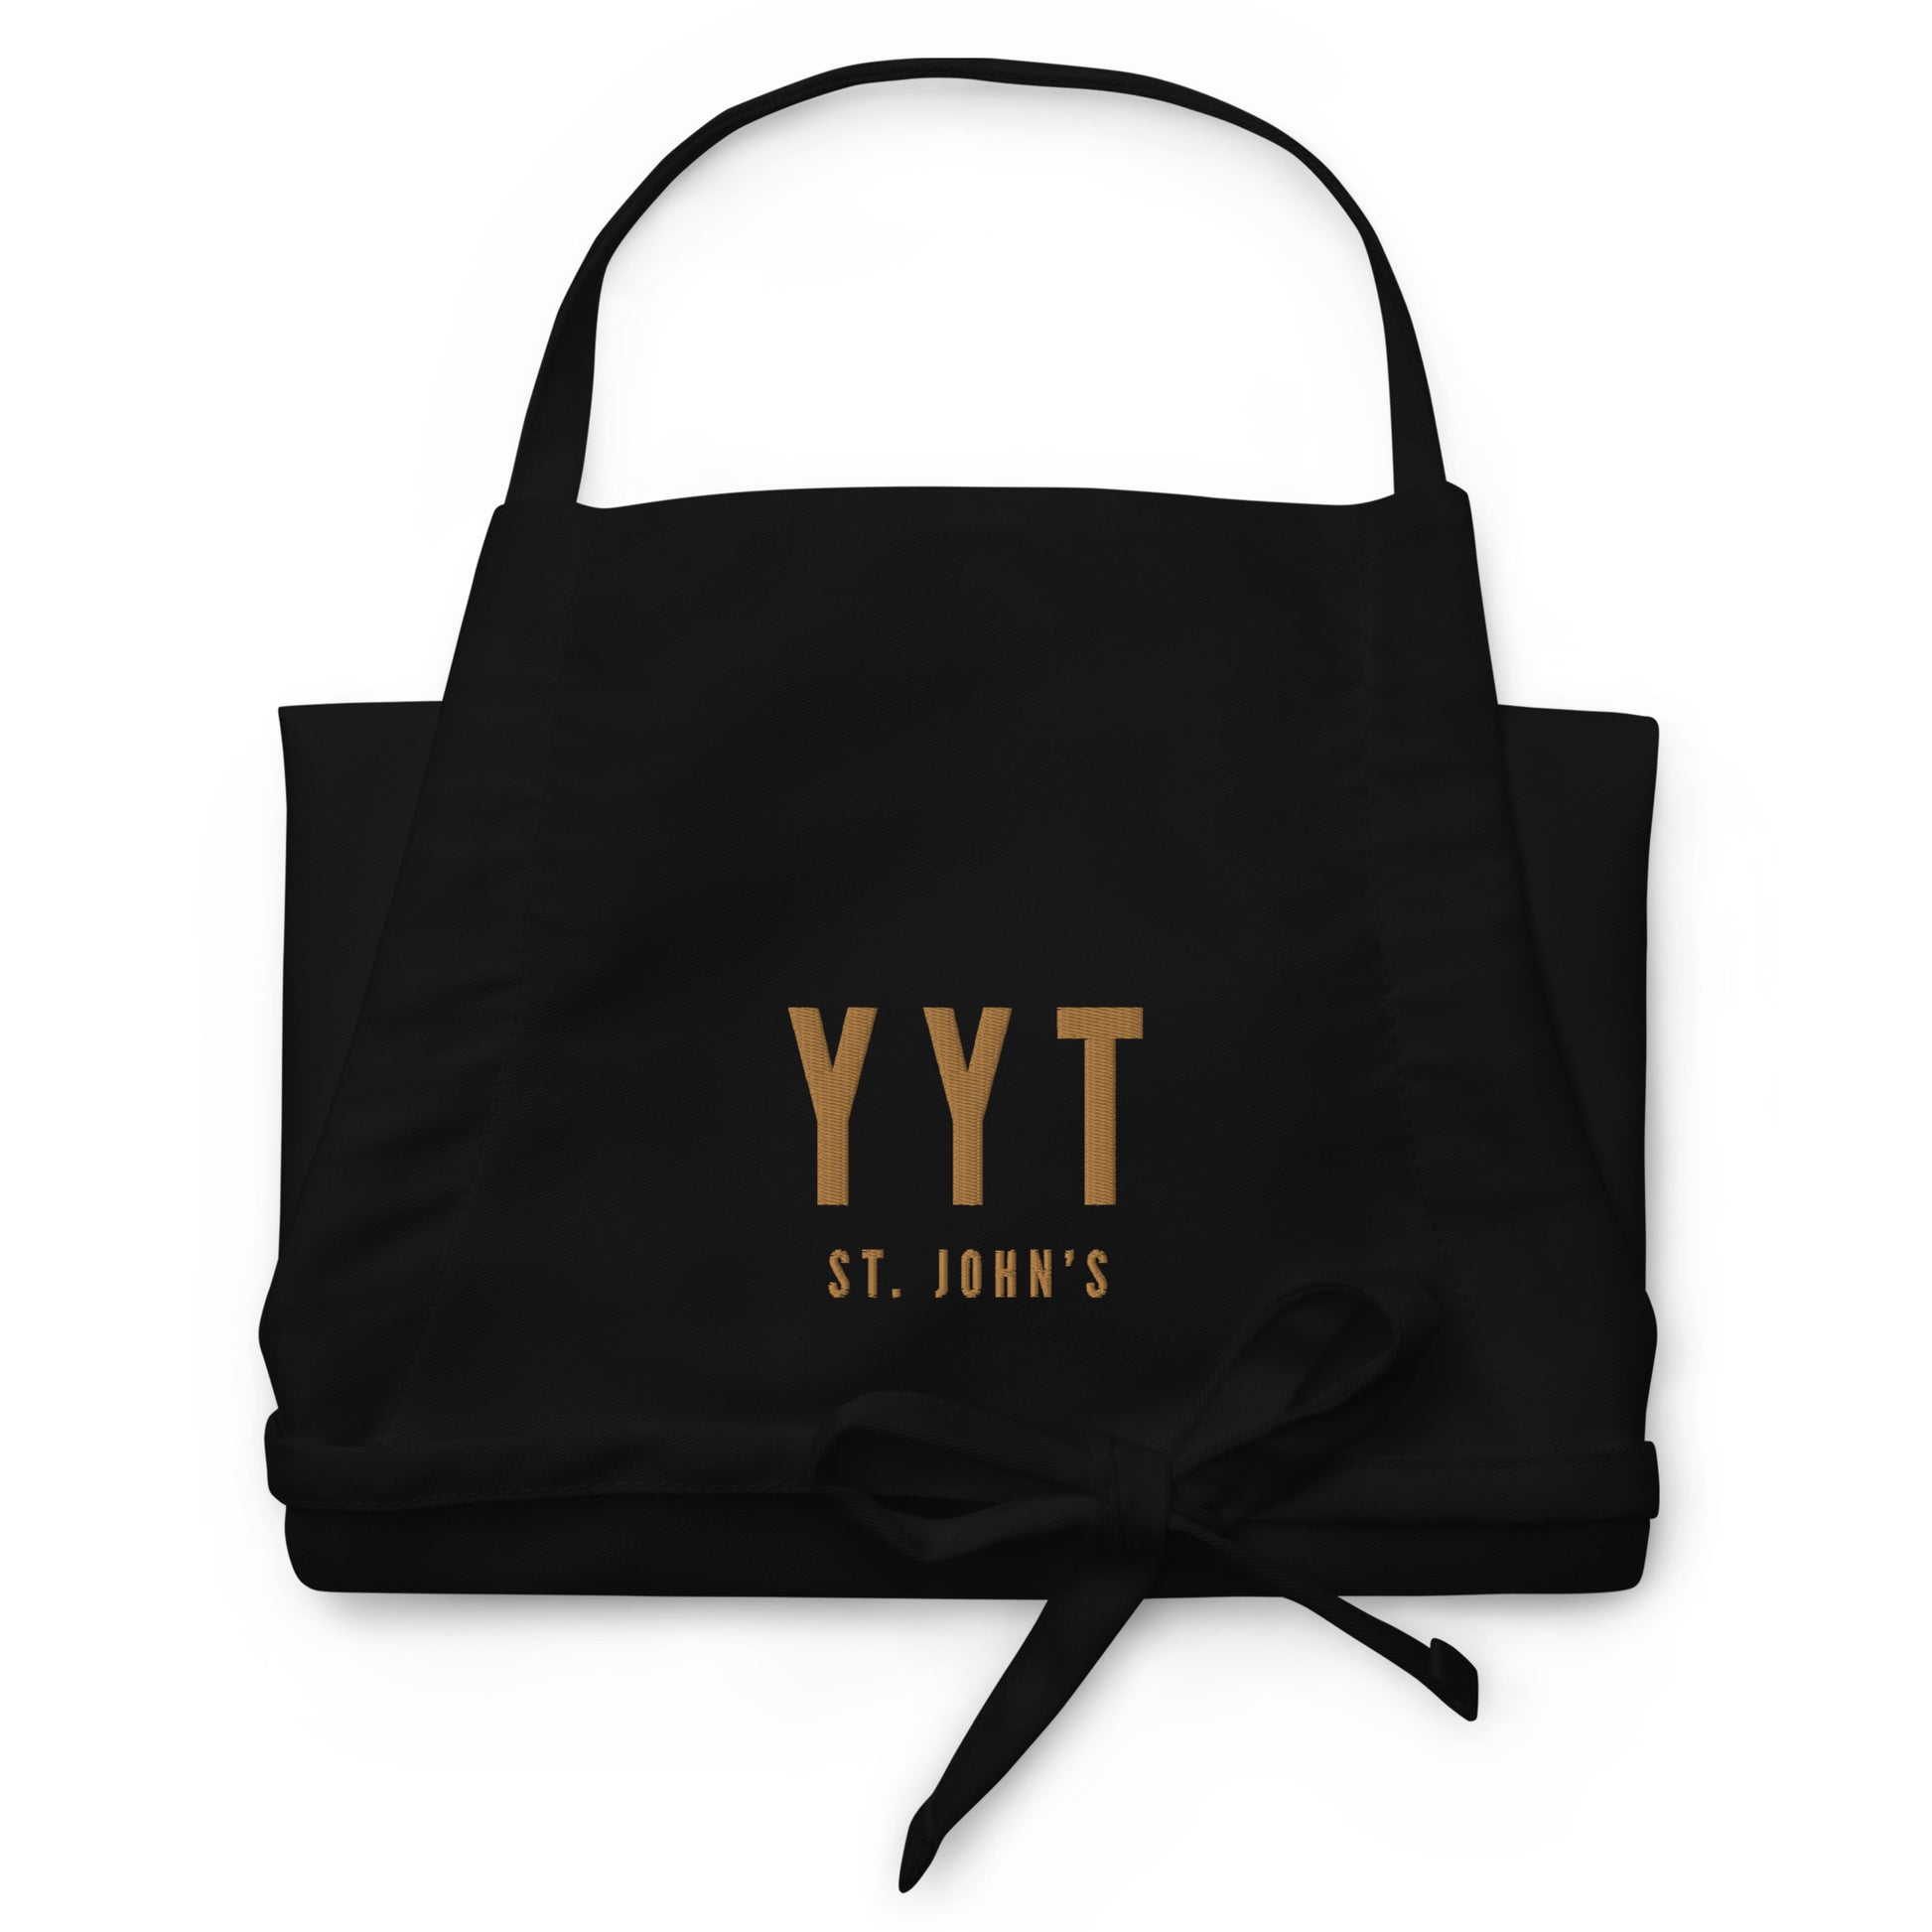 City Embroidered Apron - Old Gold • YYT St. John's • YHM Designs - Image 03